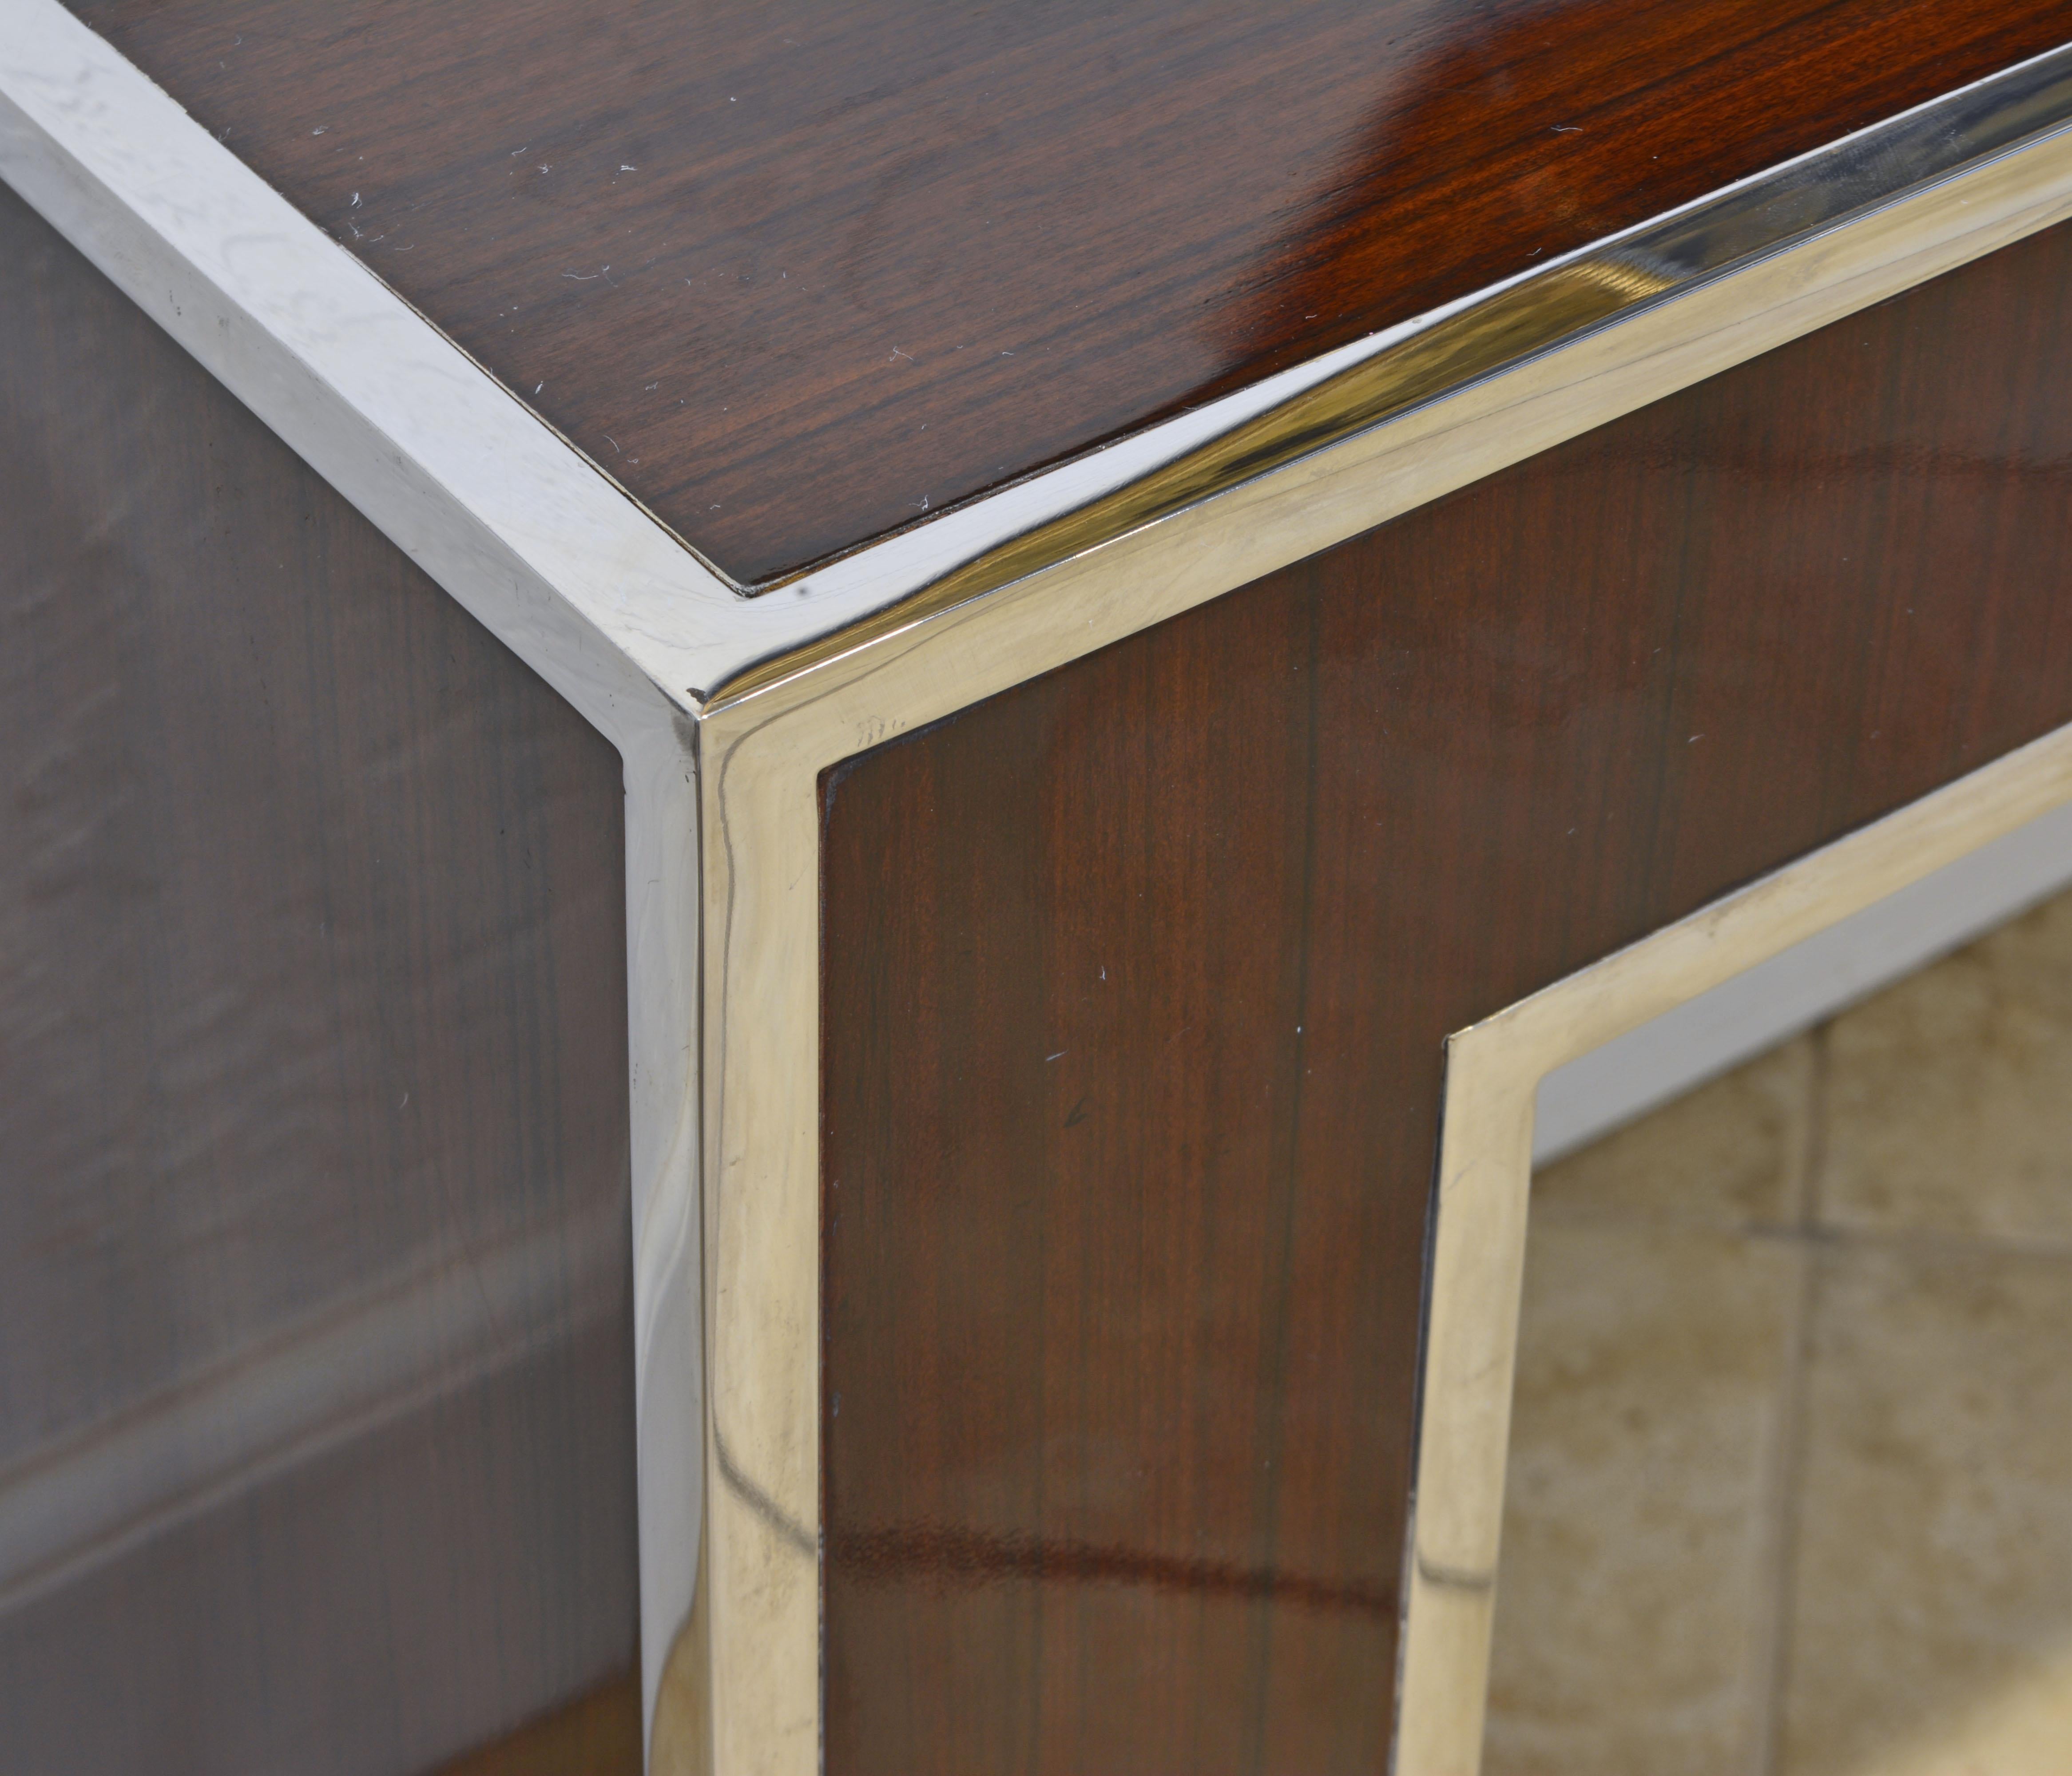 20th Century Rosewood and Polished Steel Console Table by Michael Kirkpatrick for Bolier